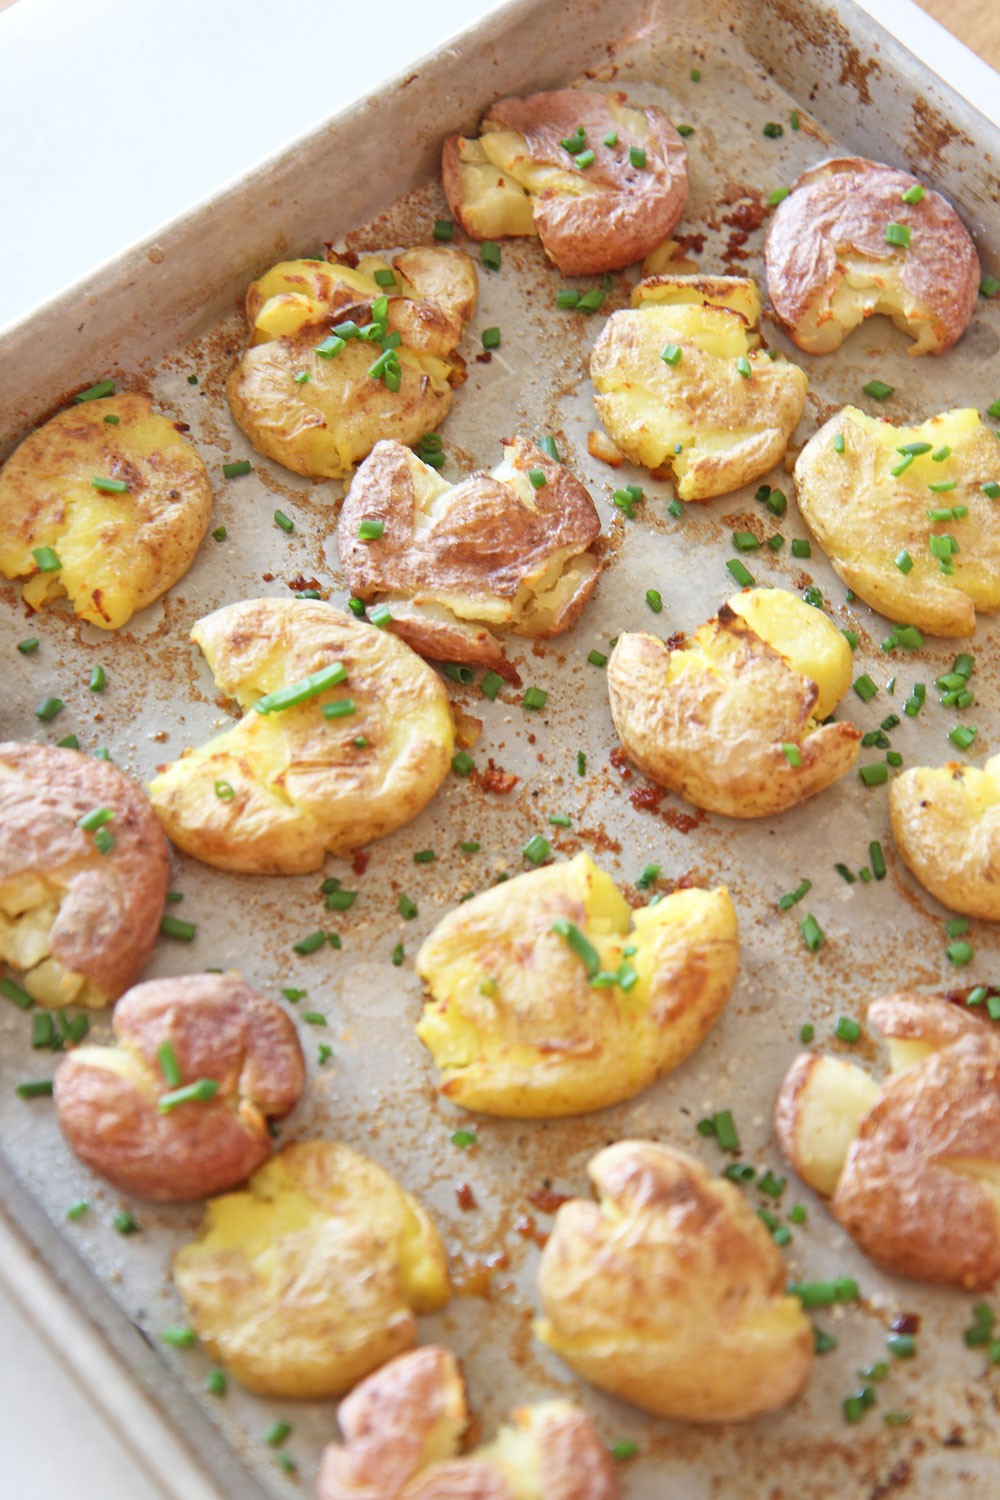 How To Make The Best Crispy Potatoes In The Oven. This is super easy side dish that is a perfect weeknight dinner idea. Grab chicken broth, Yukon gold potatoes, and garlic powder. Happy Sheet Pan Cooking! www.ChopHappy.com #crispypotatoes #howtocookpotatoes